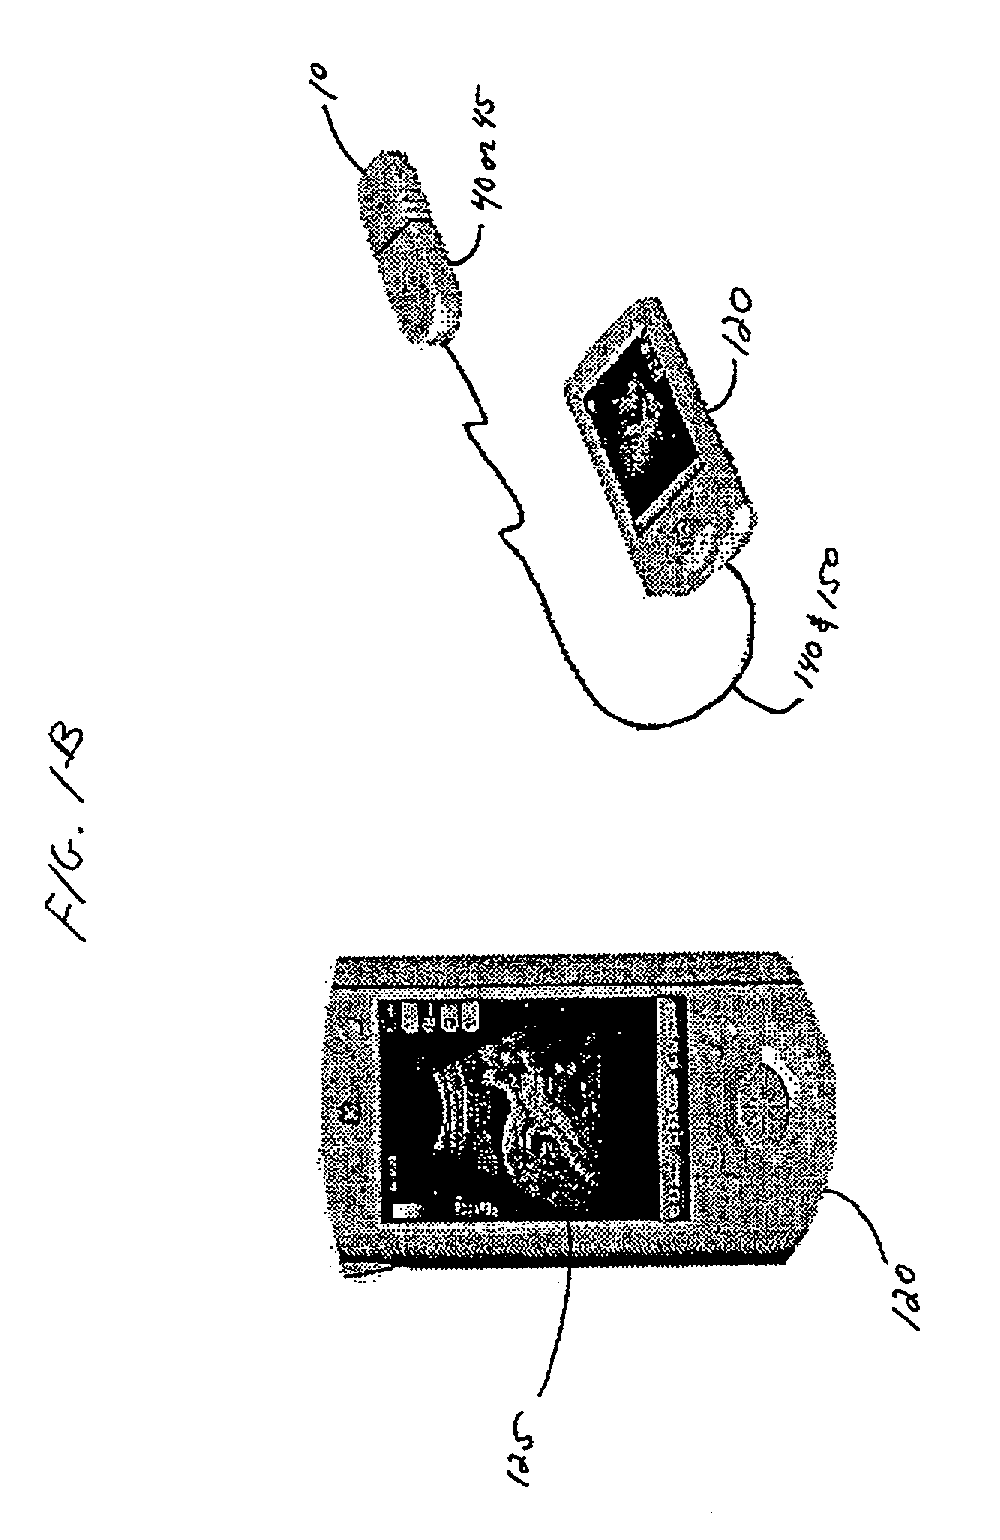 Method and system for PDA-based ultrasound system